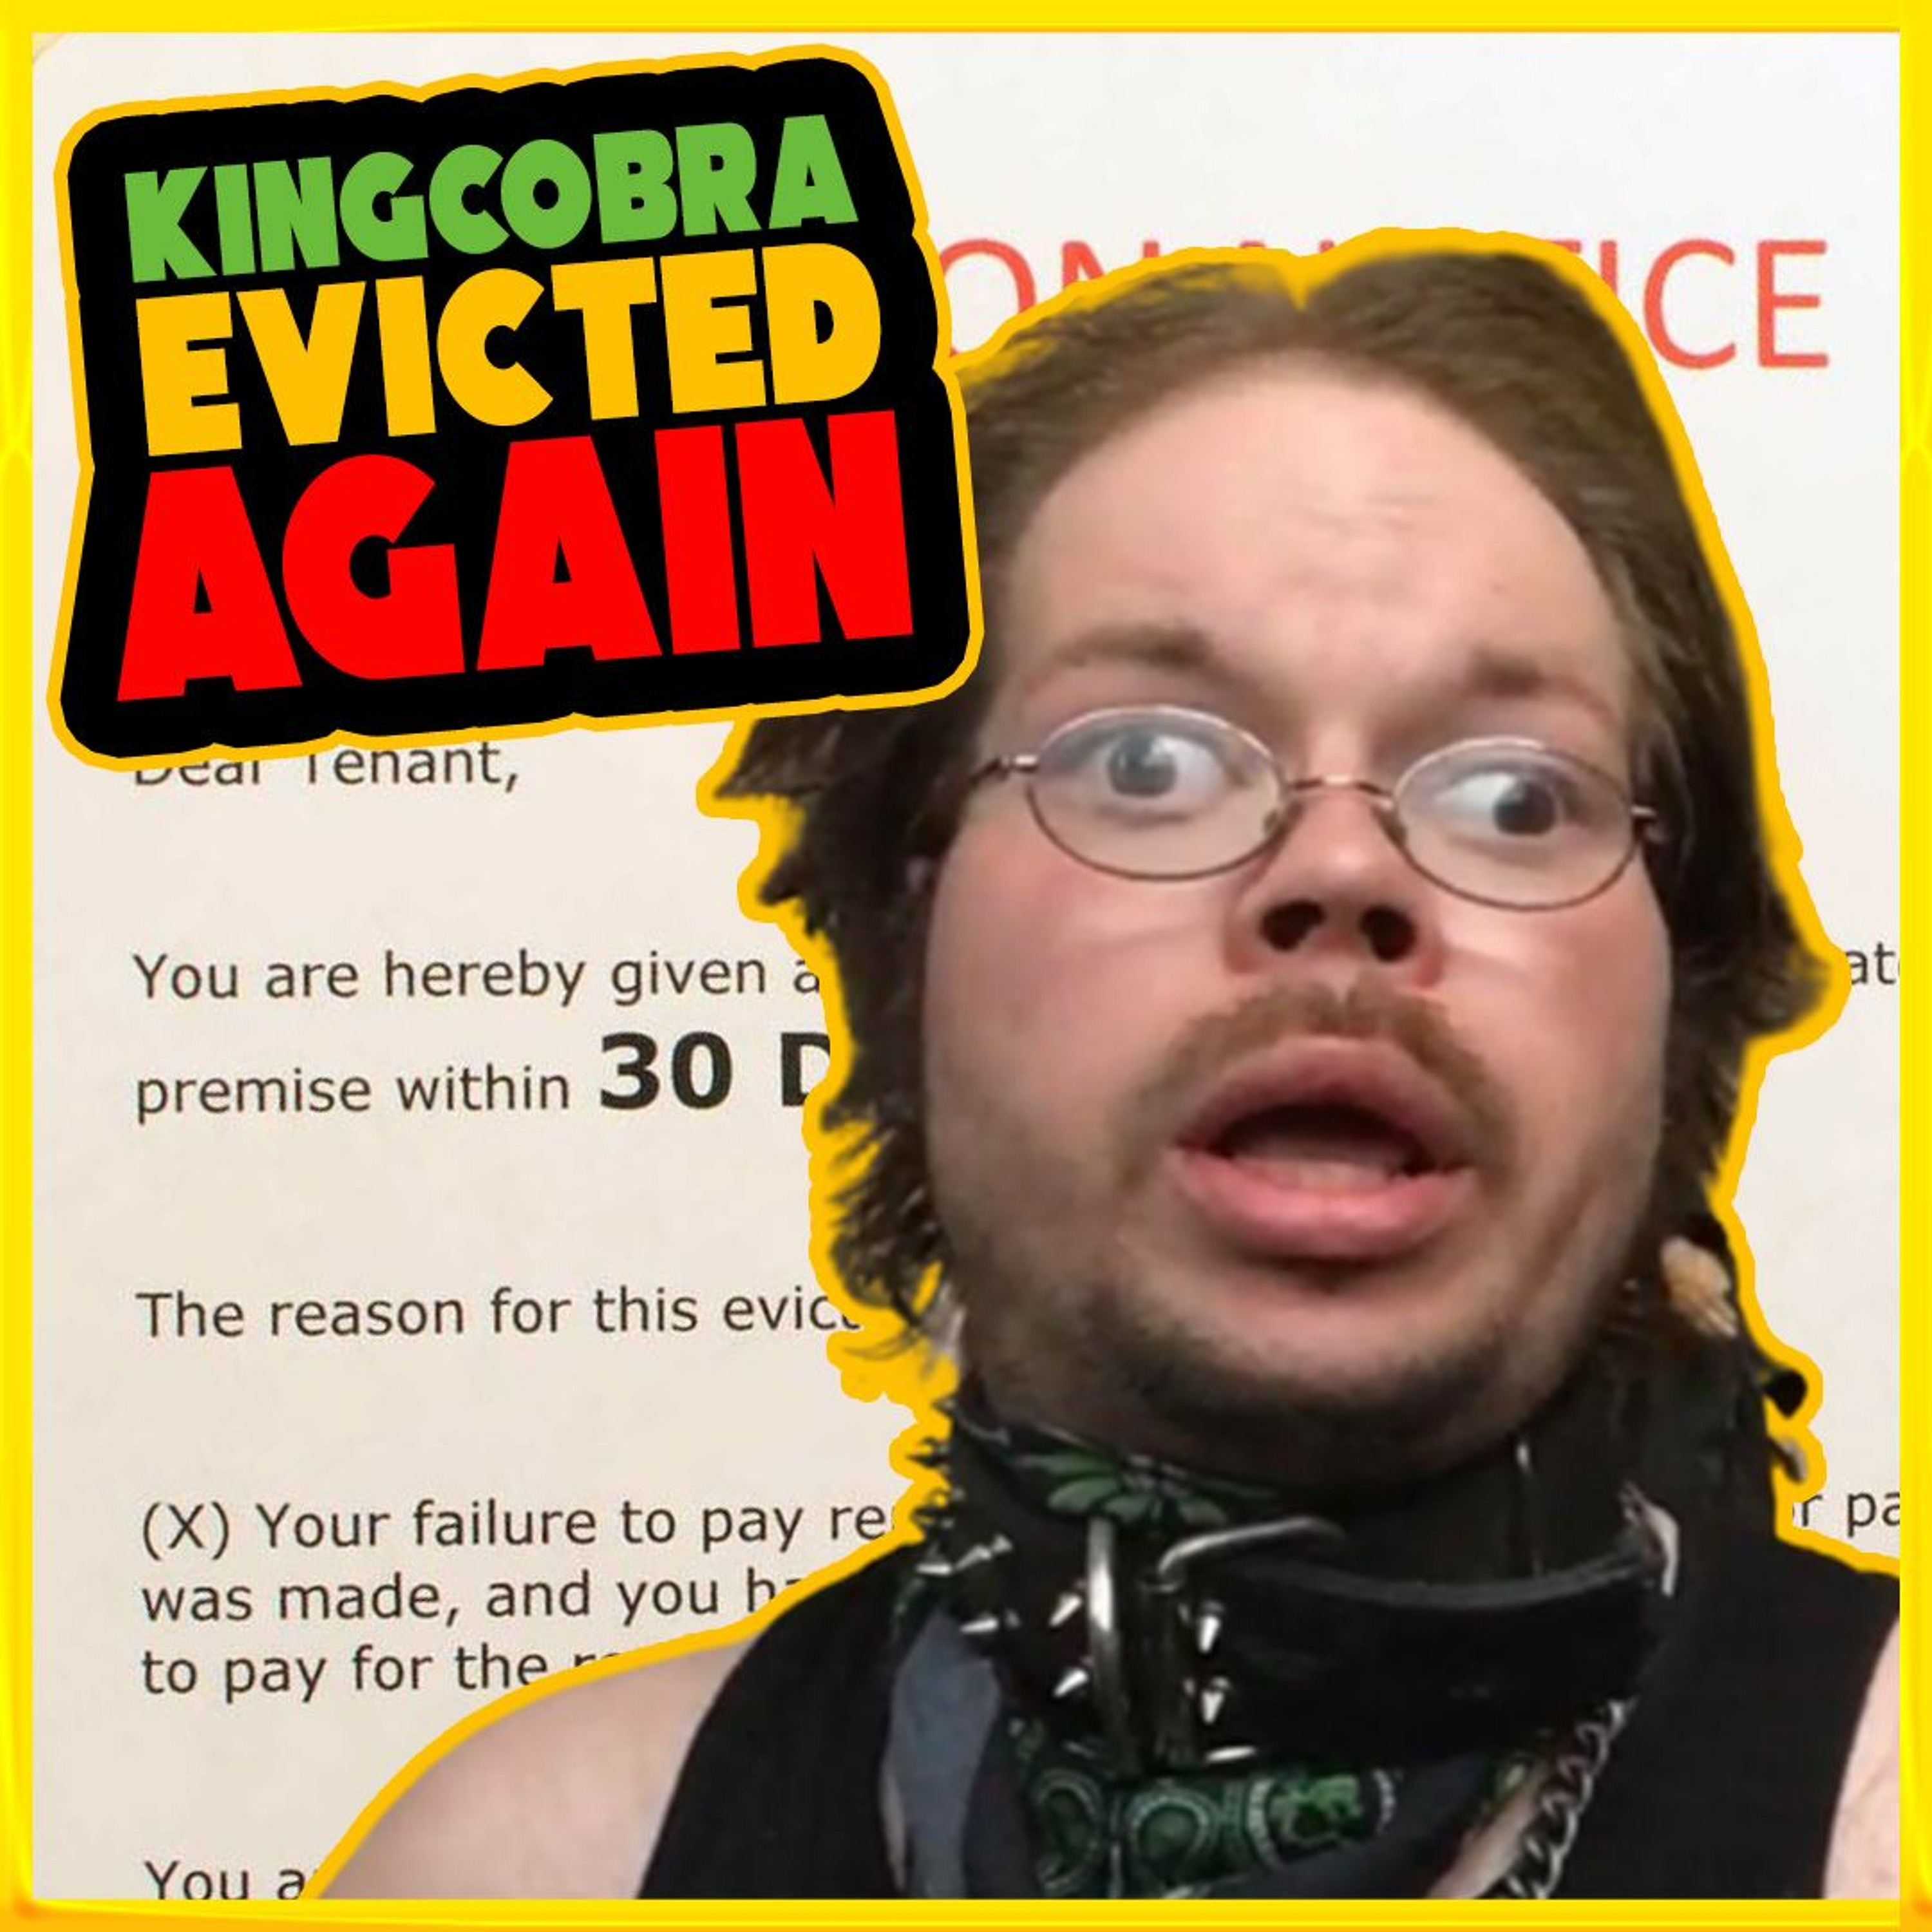 KingCobraJFS EVICTED AGAIN - Gail's APOLOGY VIDEO? - Manatee FROM the PAST | 1326